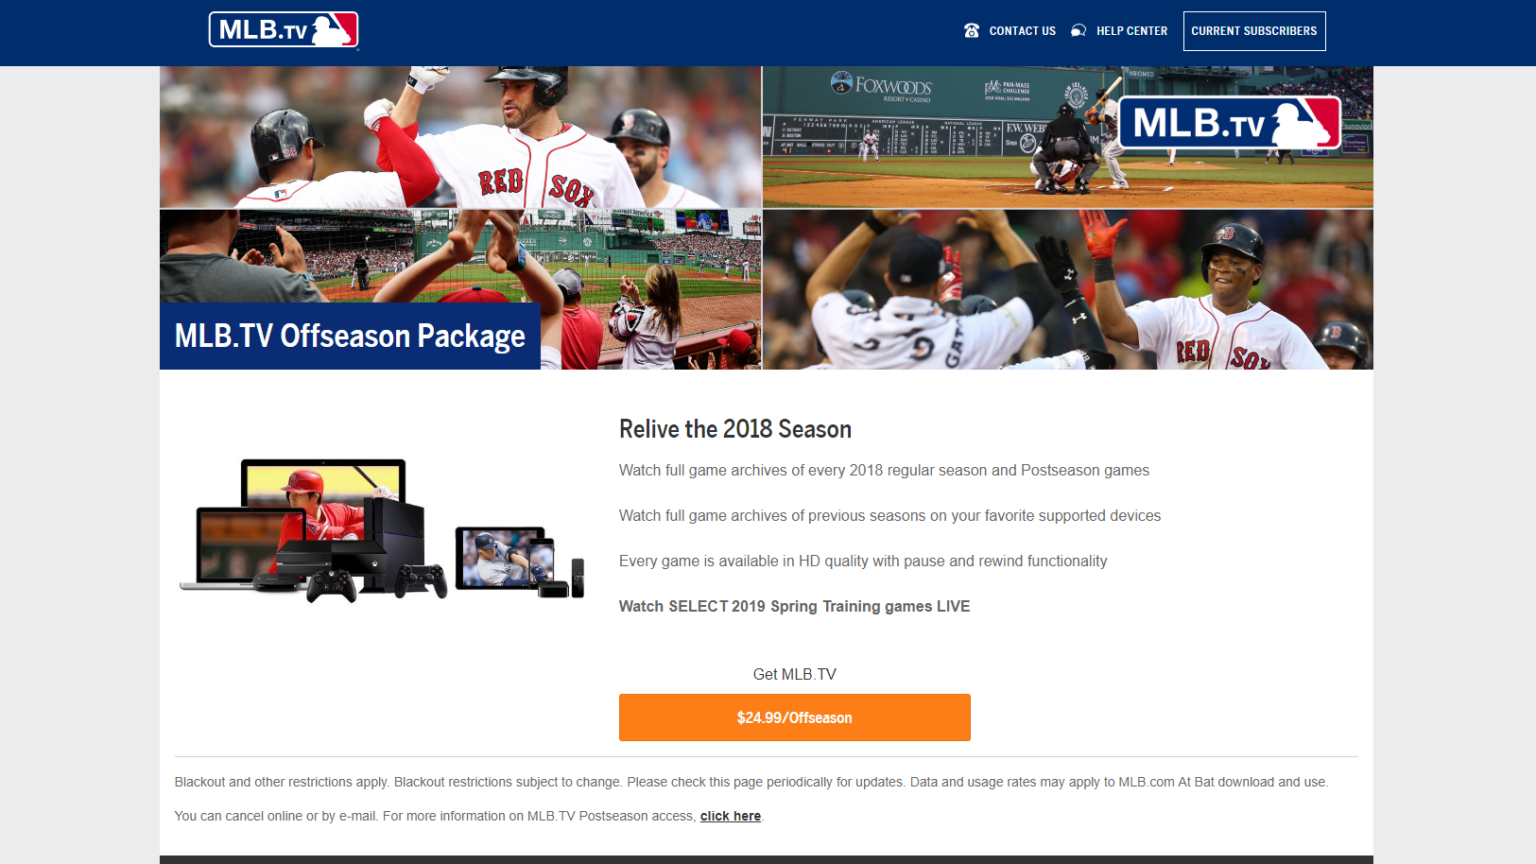 MLB.TV Review Is This The Right Platform For DieHard Baseball Fans?